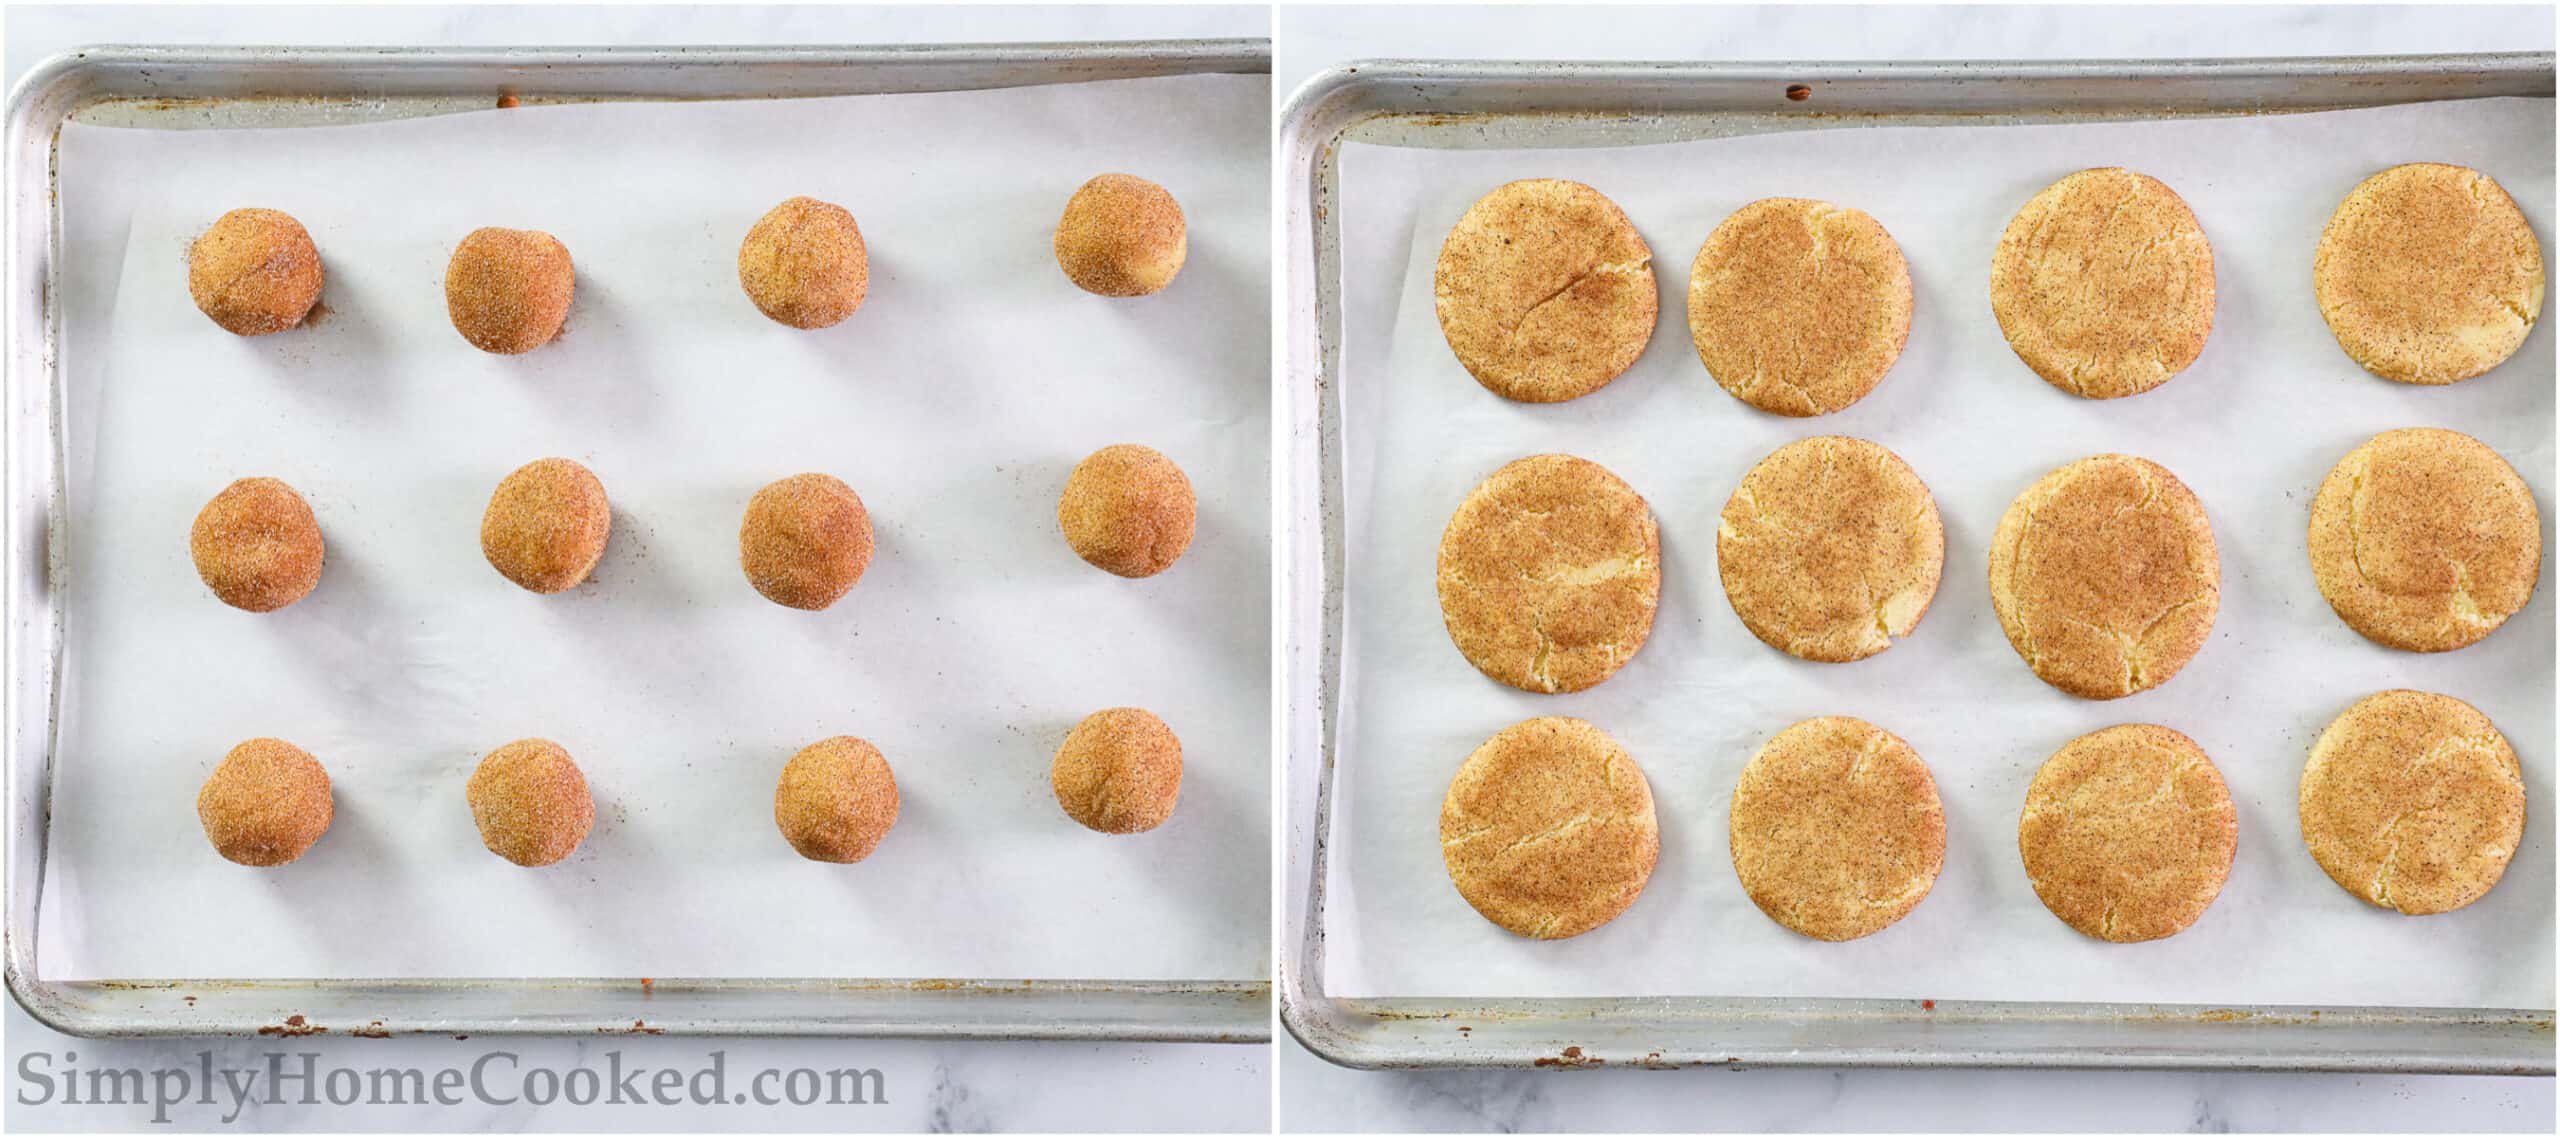 Steps to make Soft Snickerdoodle Cookies, including placing the balls of cookie dough on a baking sheet and baking until soft.